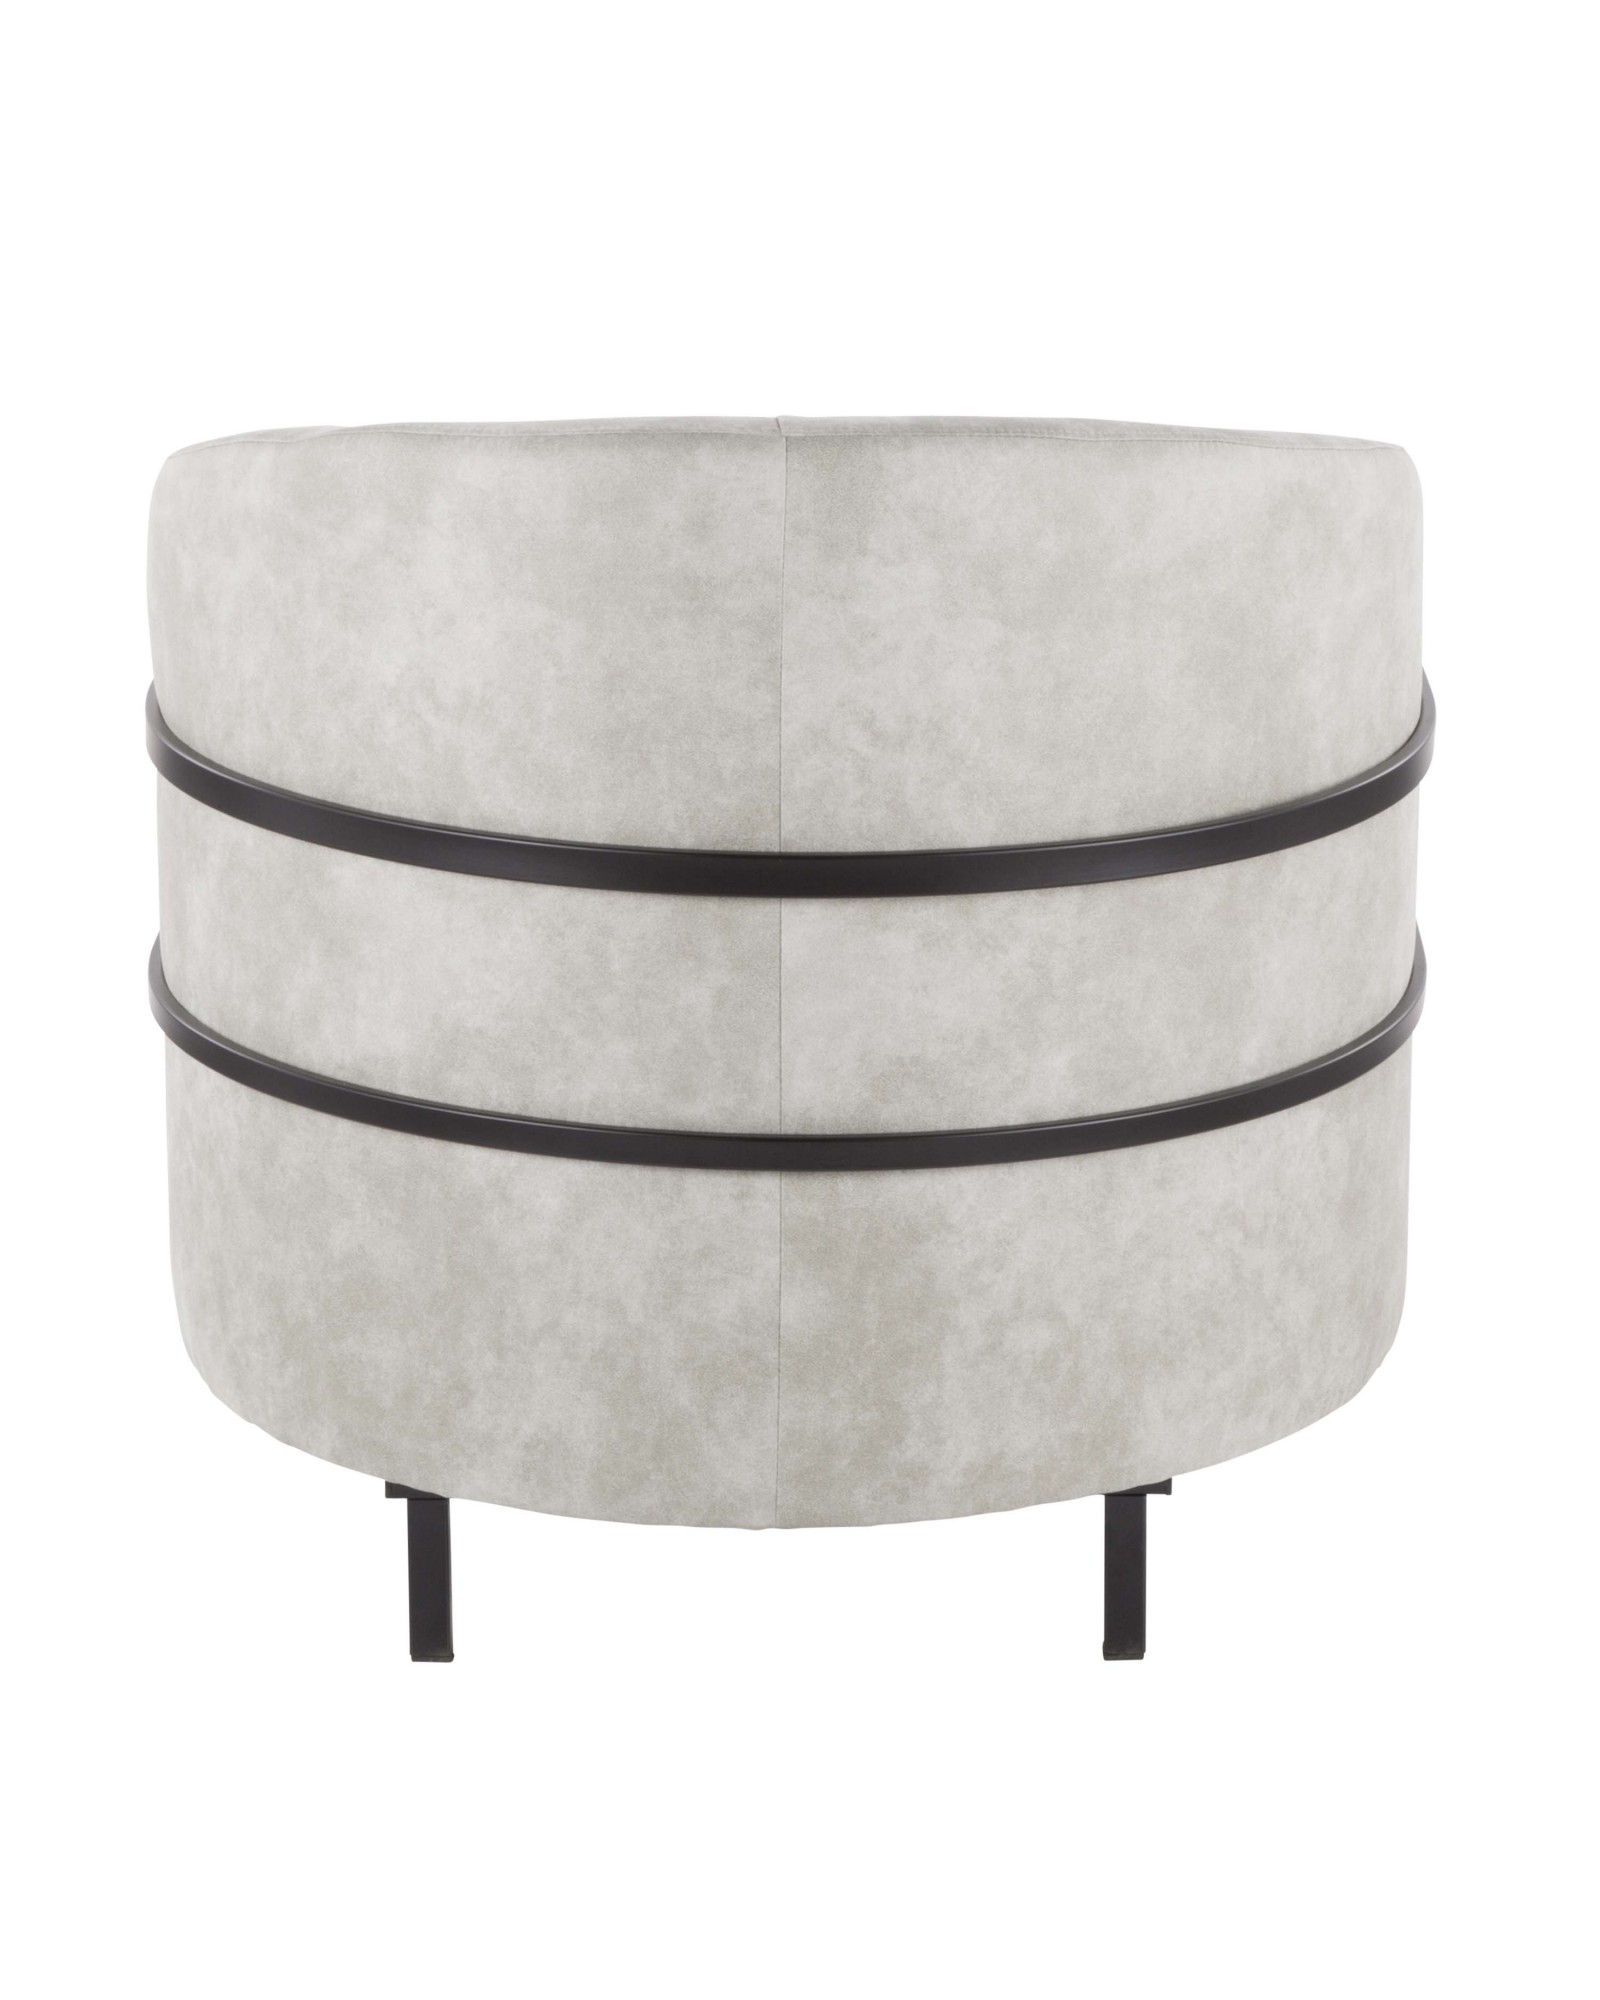 Colby Industrial Tub Chair in Black with Light Grey Cowboy Fabric